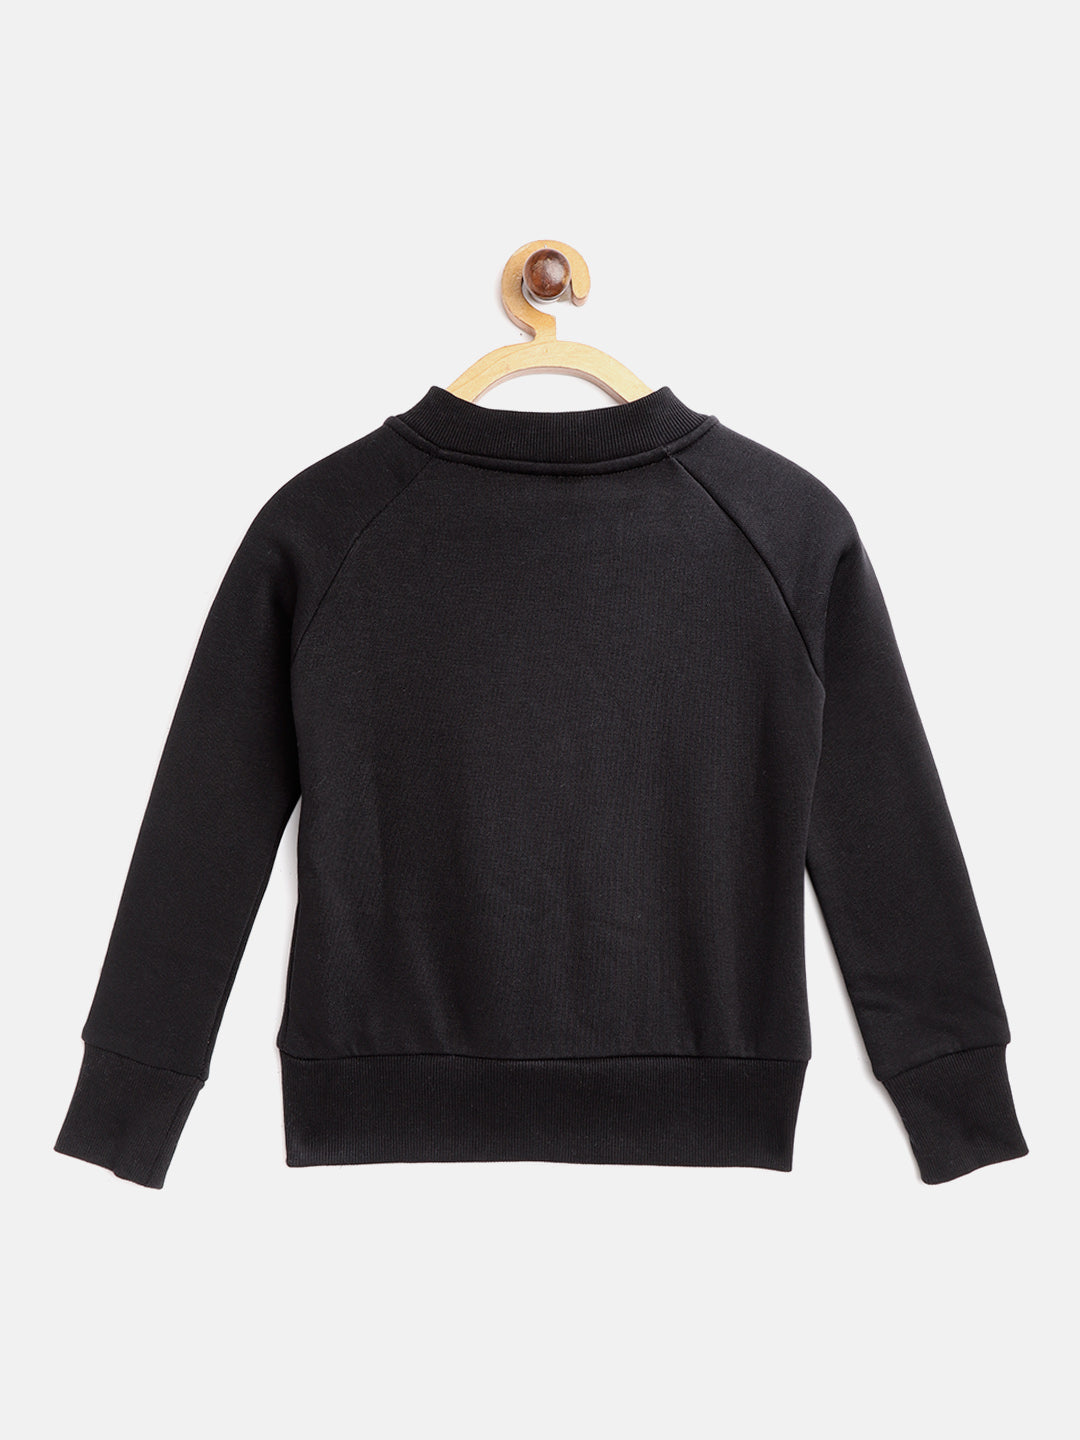 Alcis Girls Black Solid Sweatshirt with Embroidered Detail